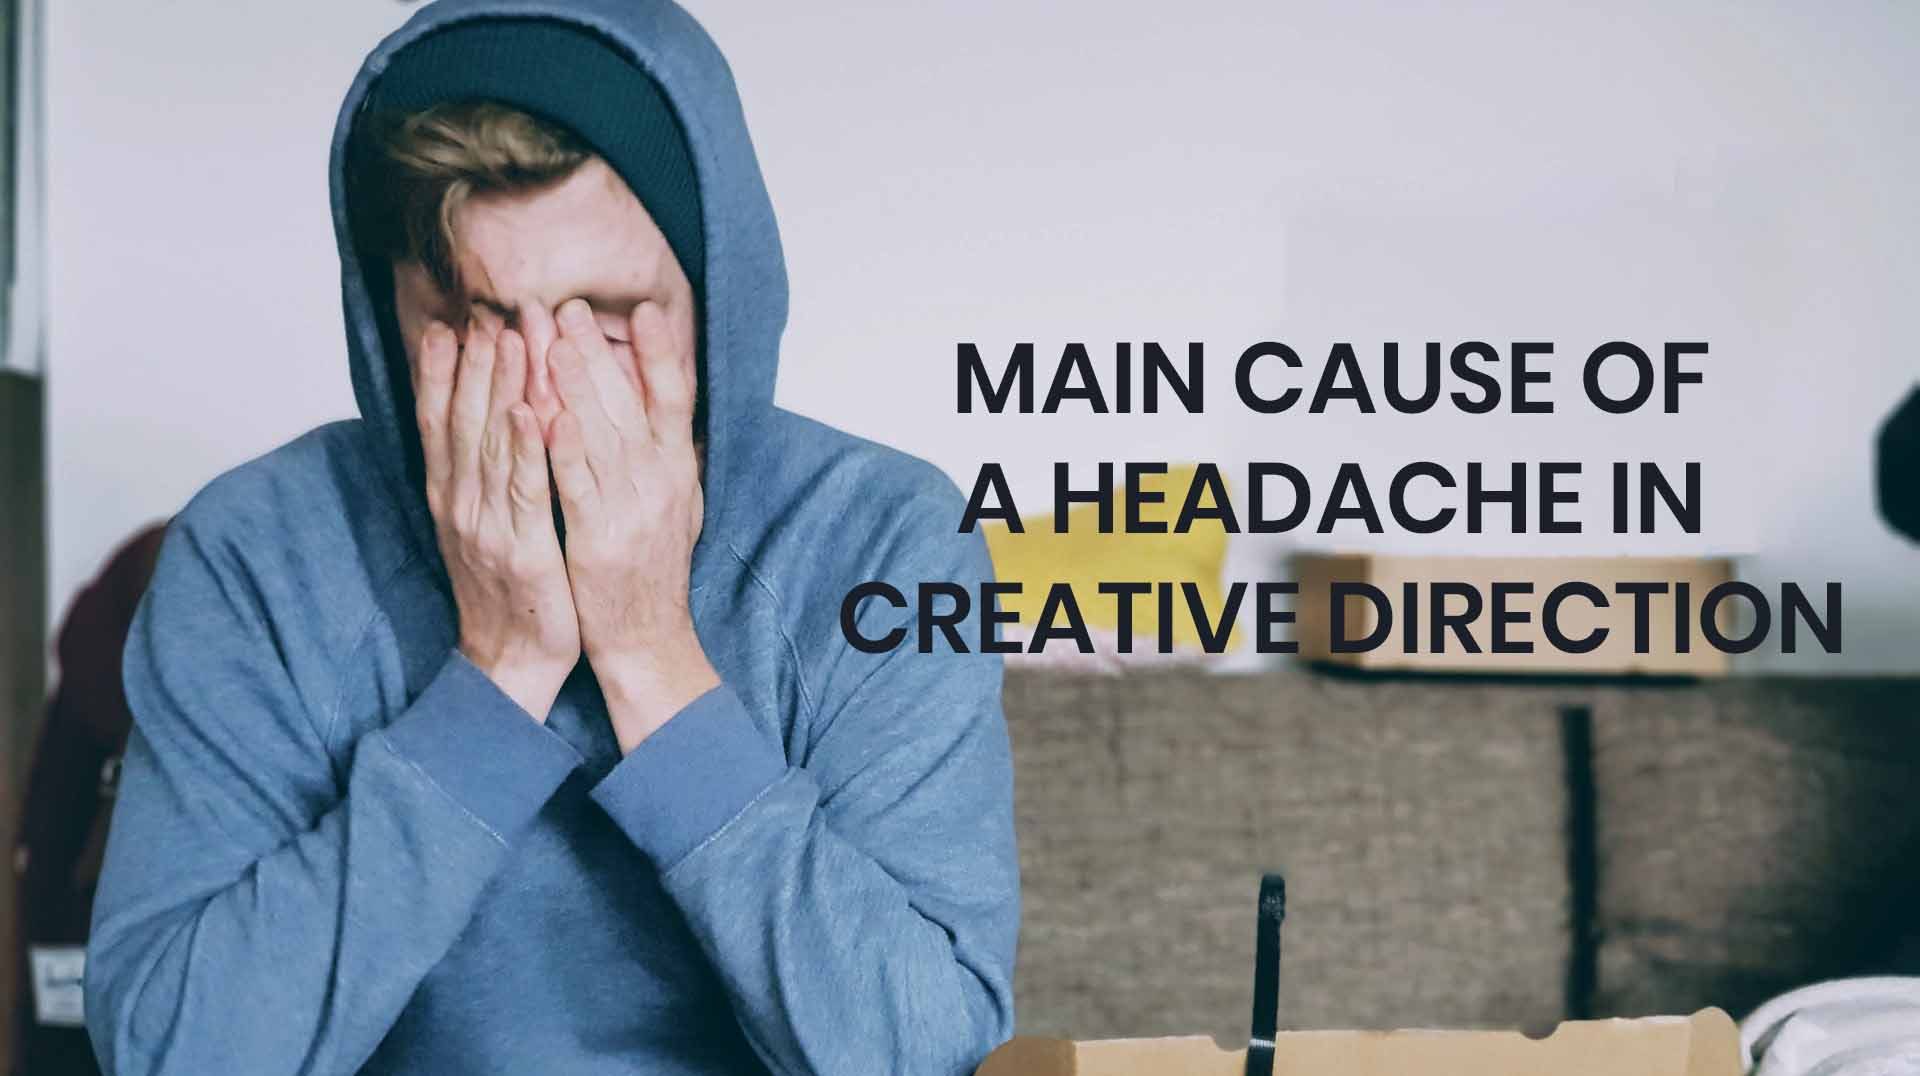 What-is-the-main-cause-of-a-headache-in-creative-direction-opt